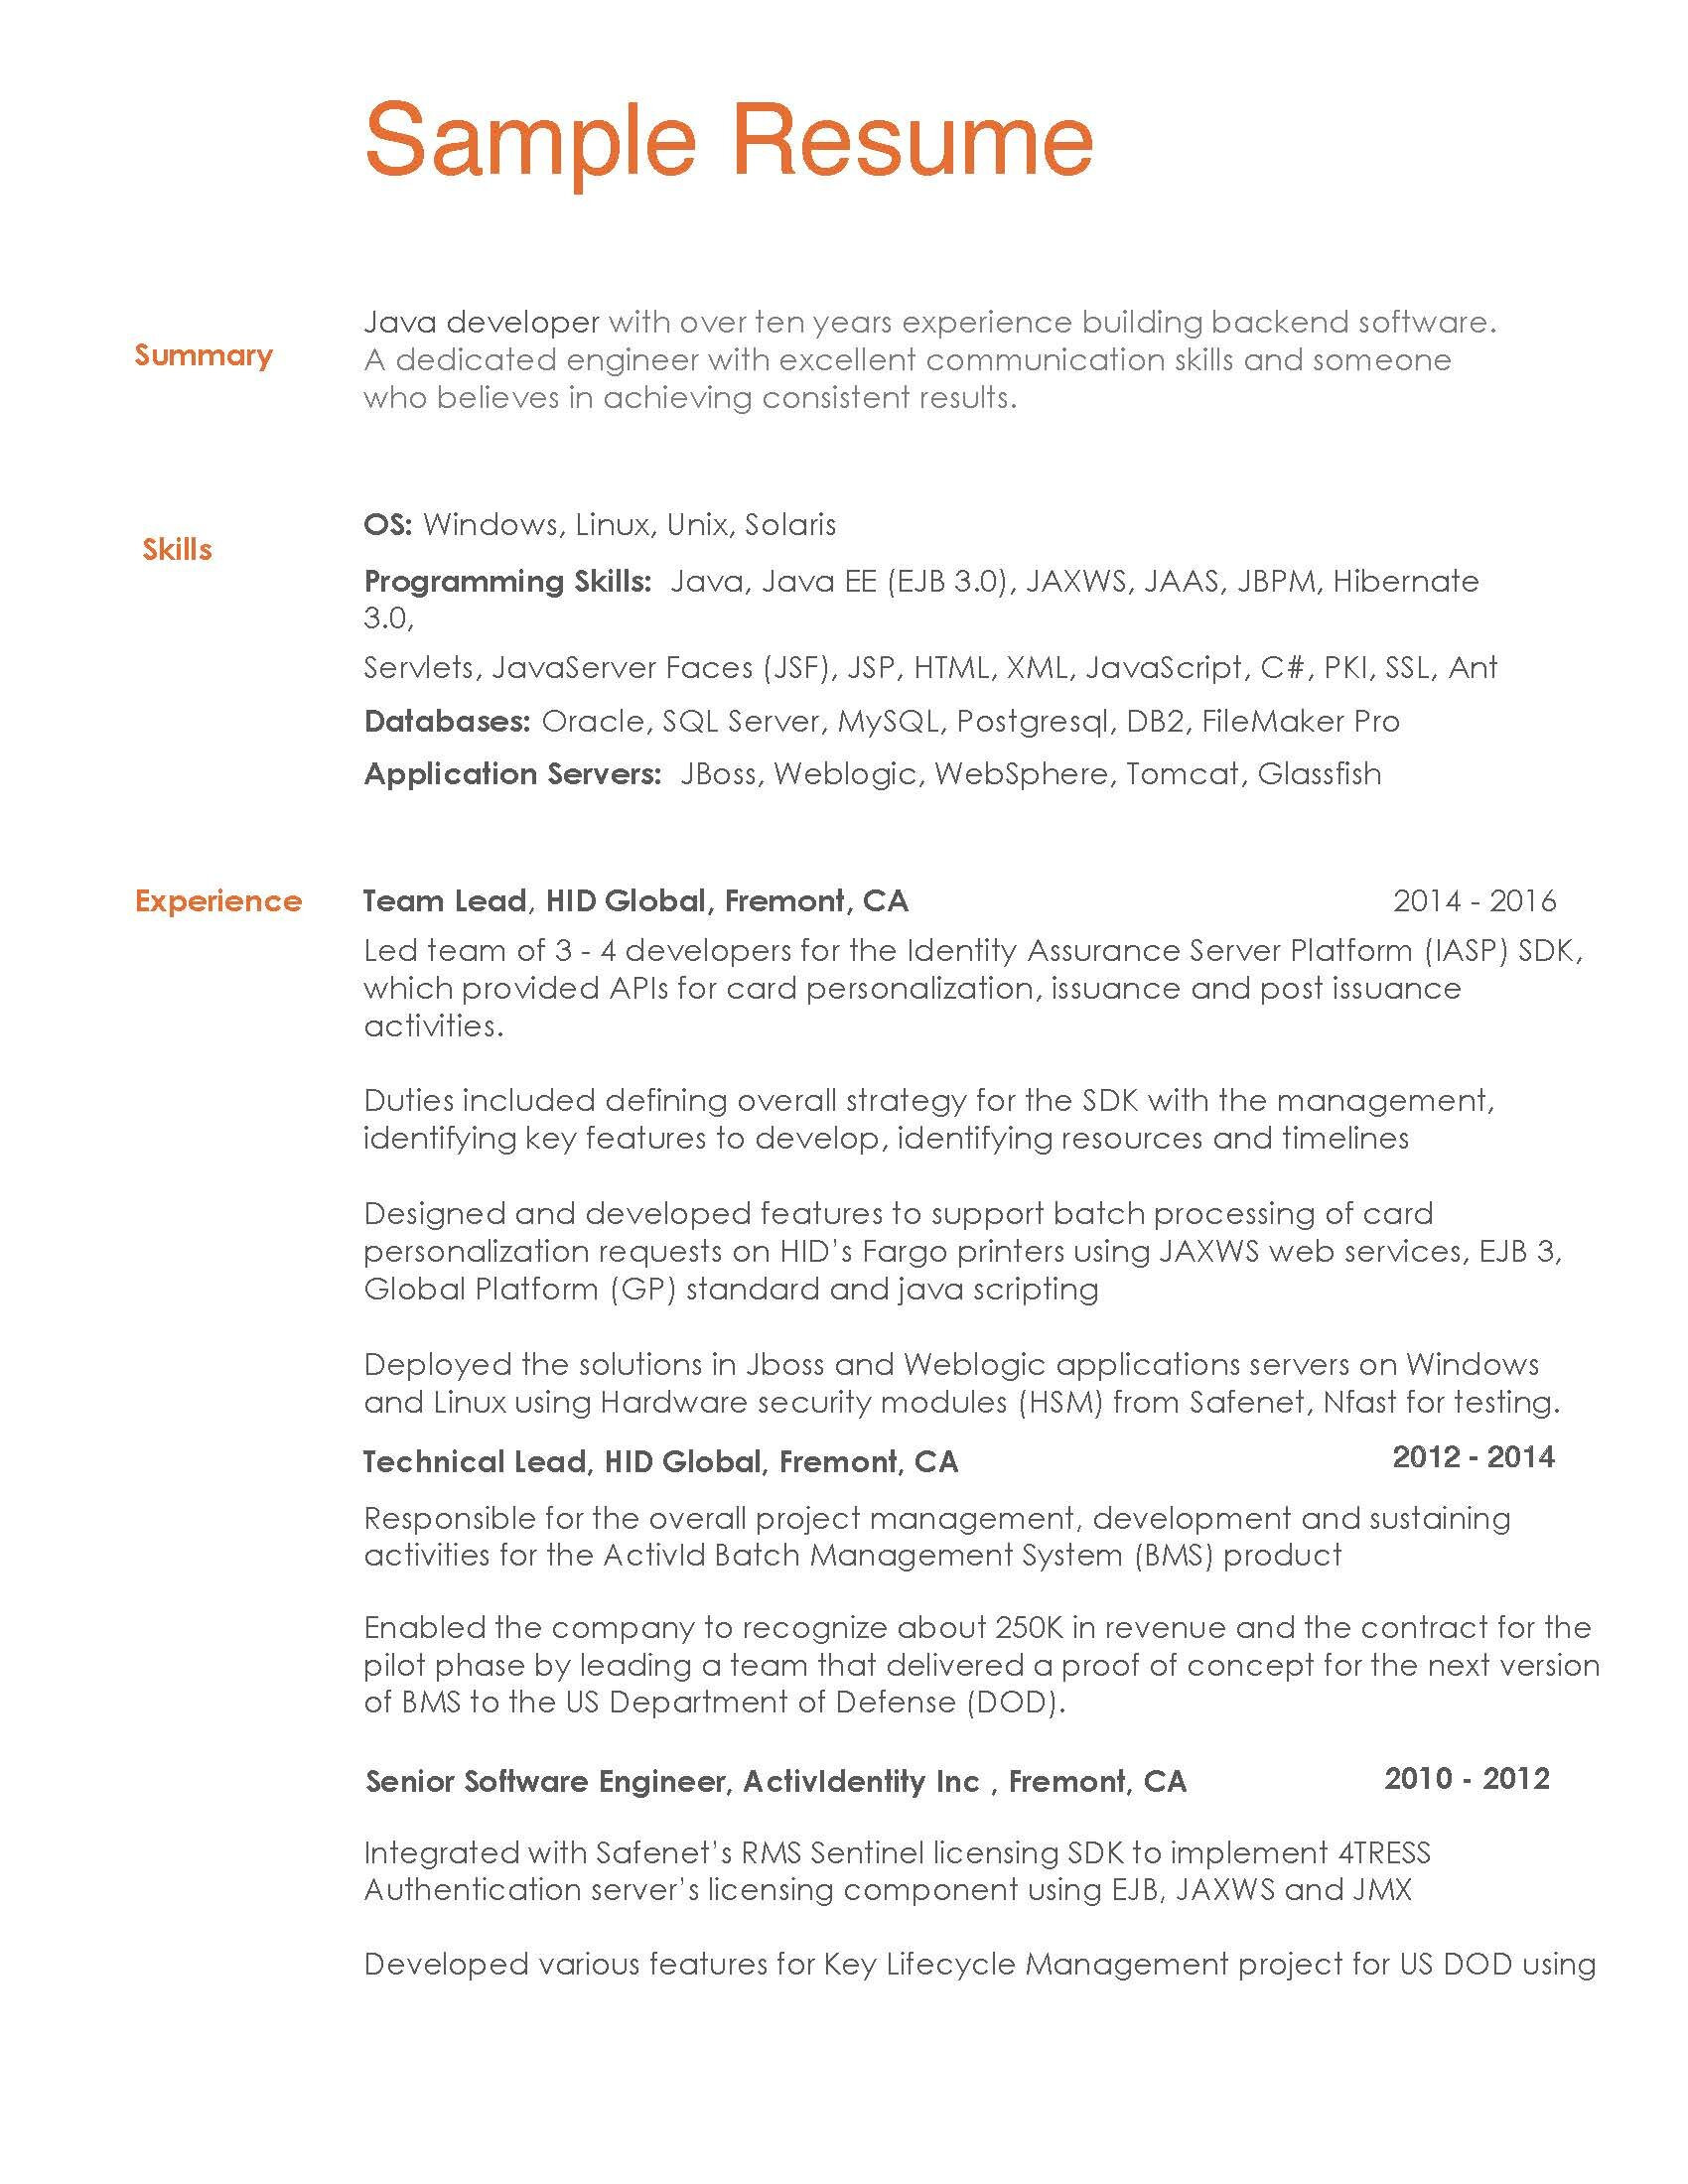 Resume Sample for Returning to Workforce A Resume formatting Guide for Women Returning to the Workplace